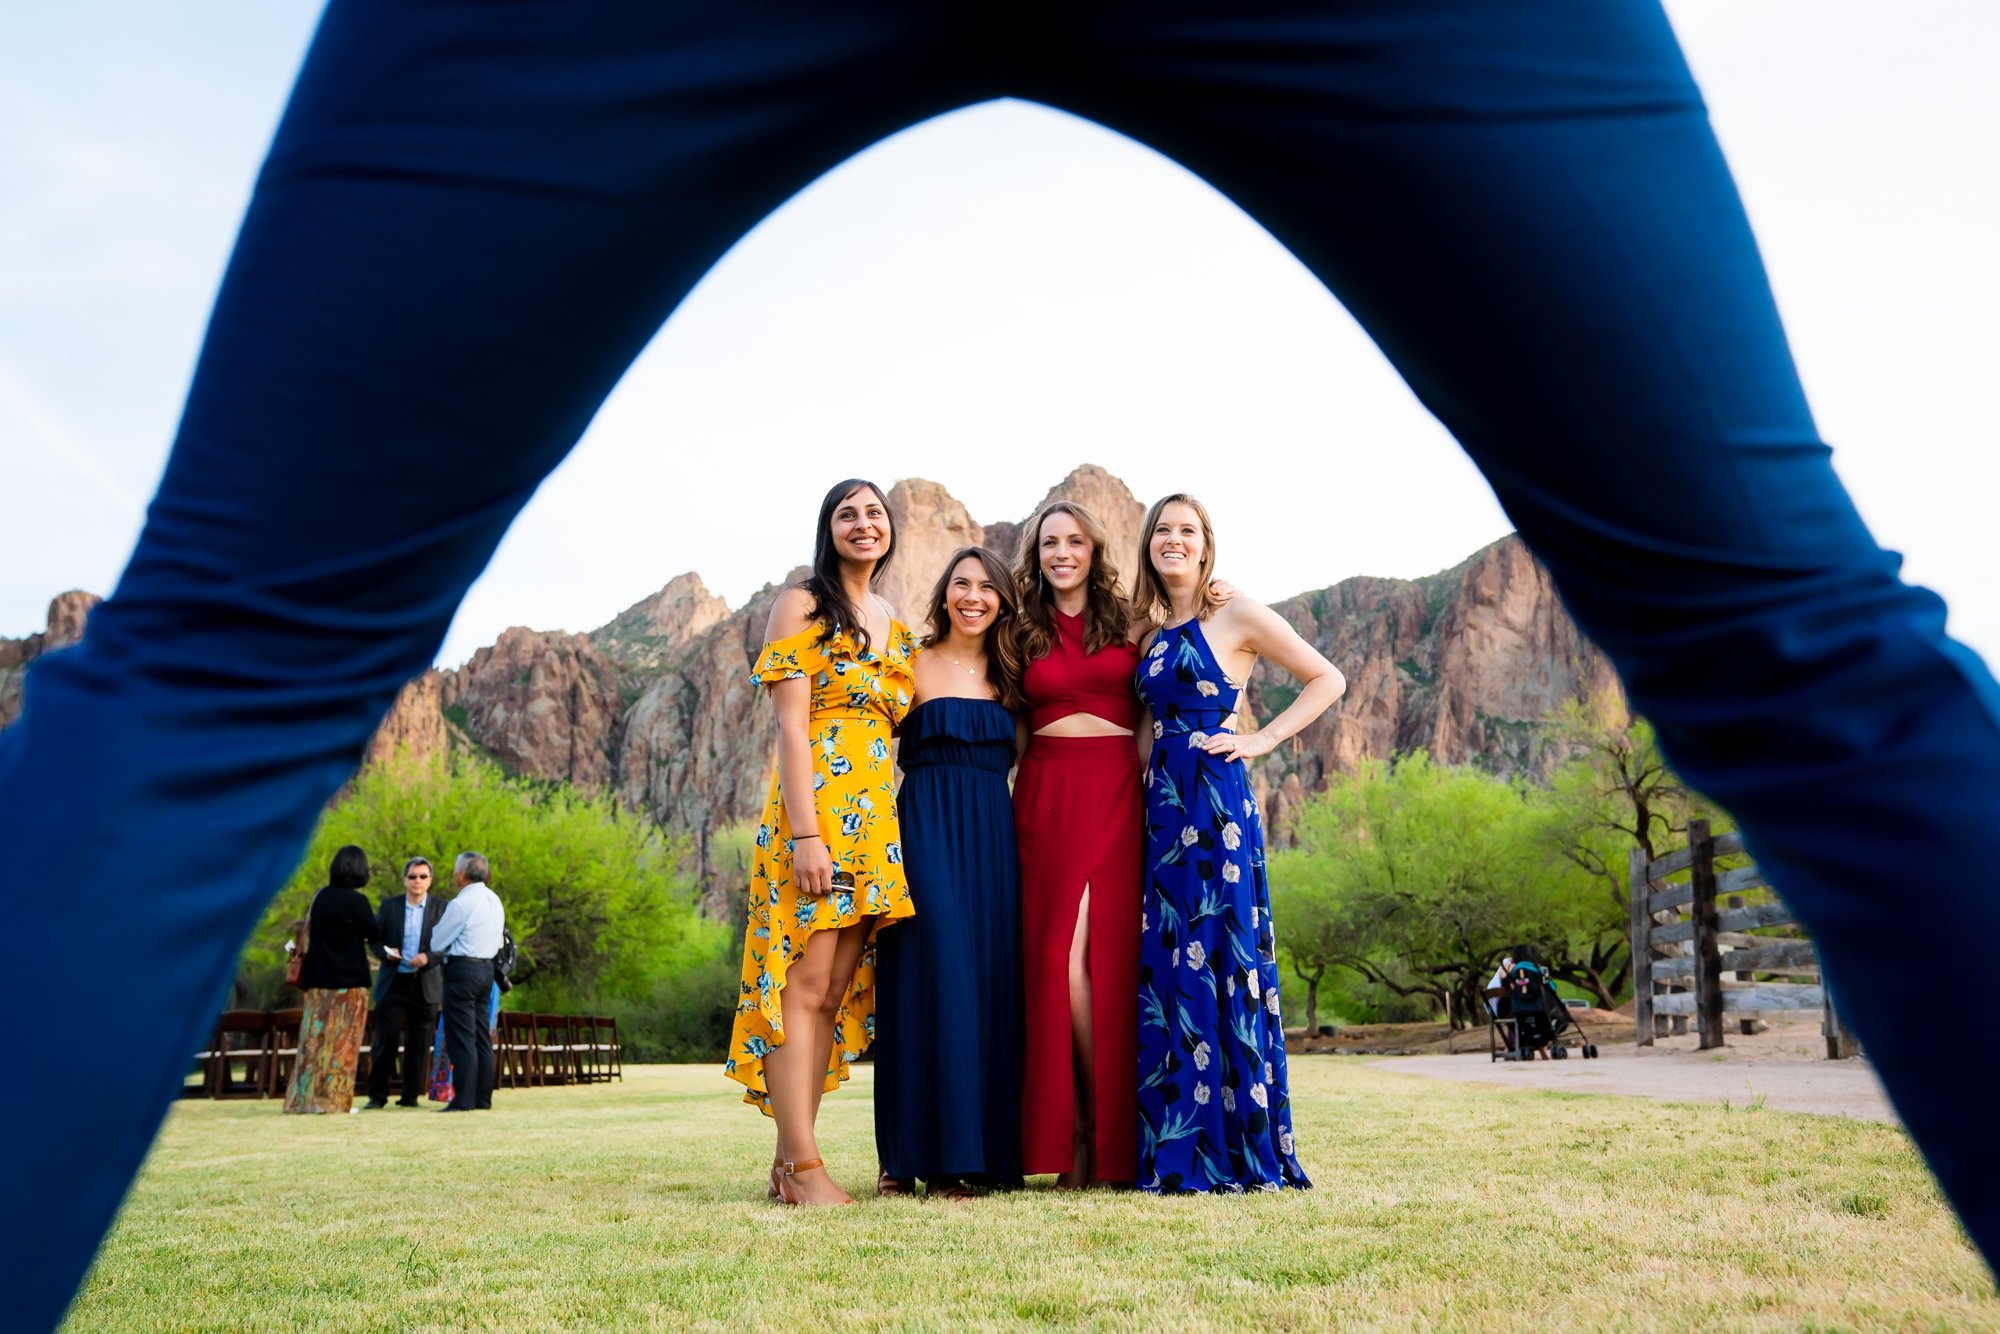 Saguaro Lake Guest Ranch The Perfect Location for a Laid-Back Fun-Filled Wedding. The best documentary wedding photographer Mantas Kubilinskas-37.jpg